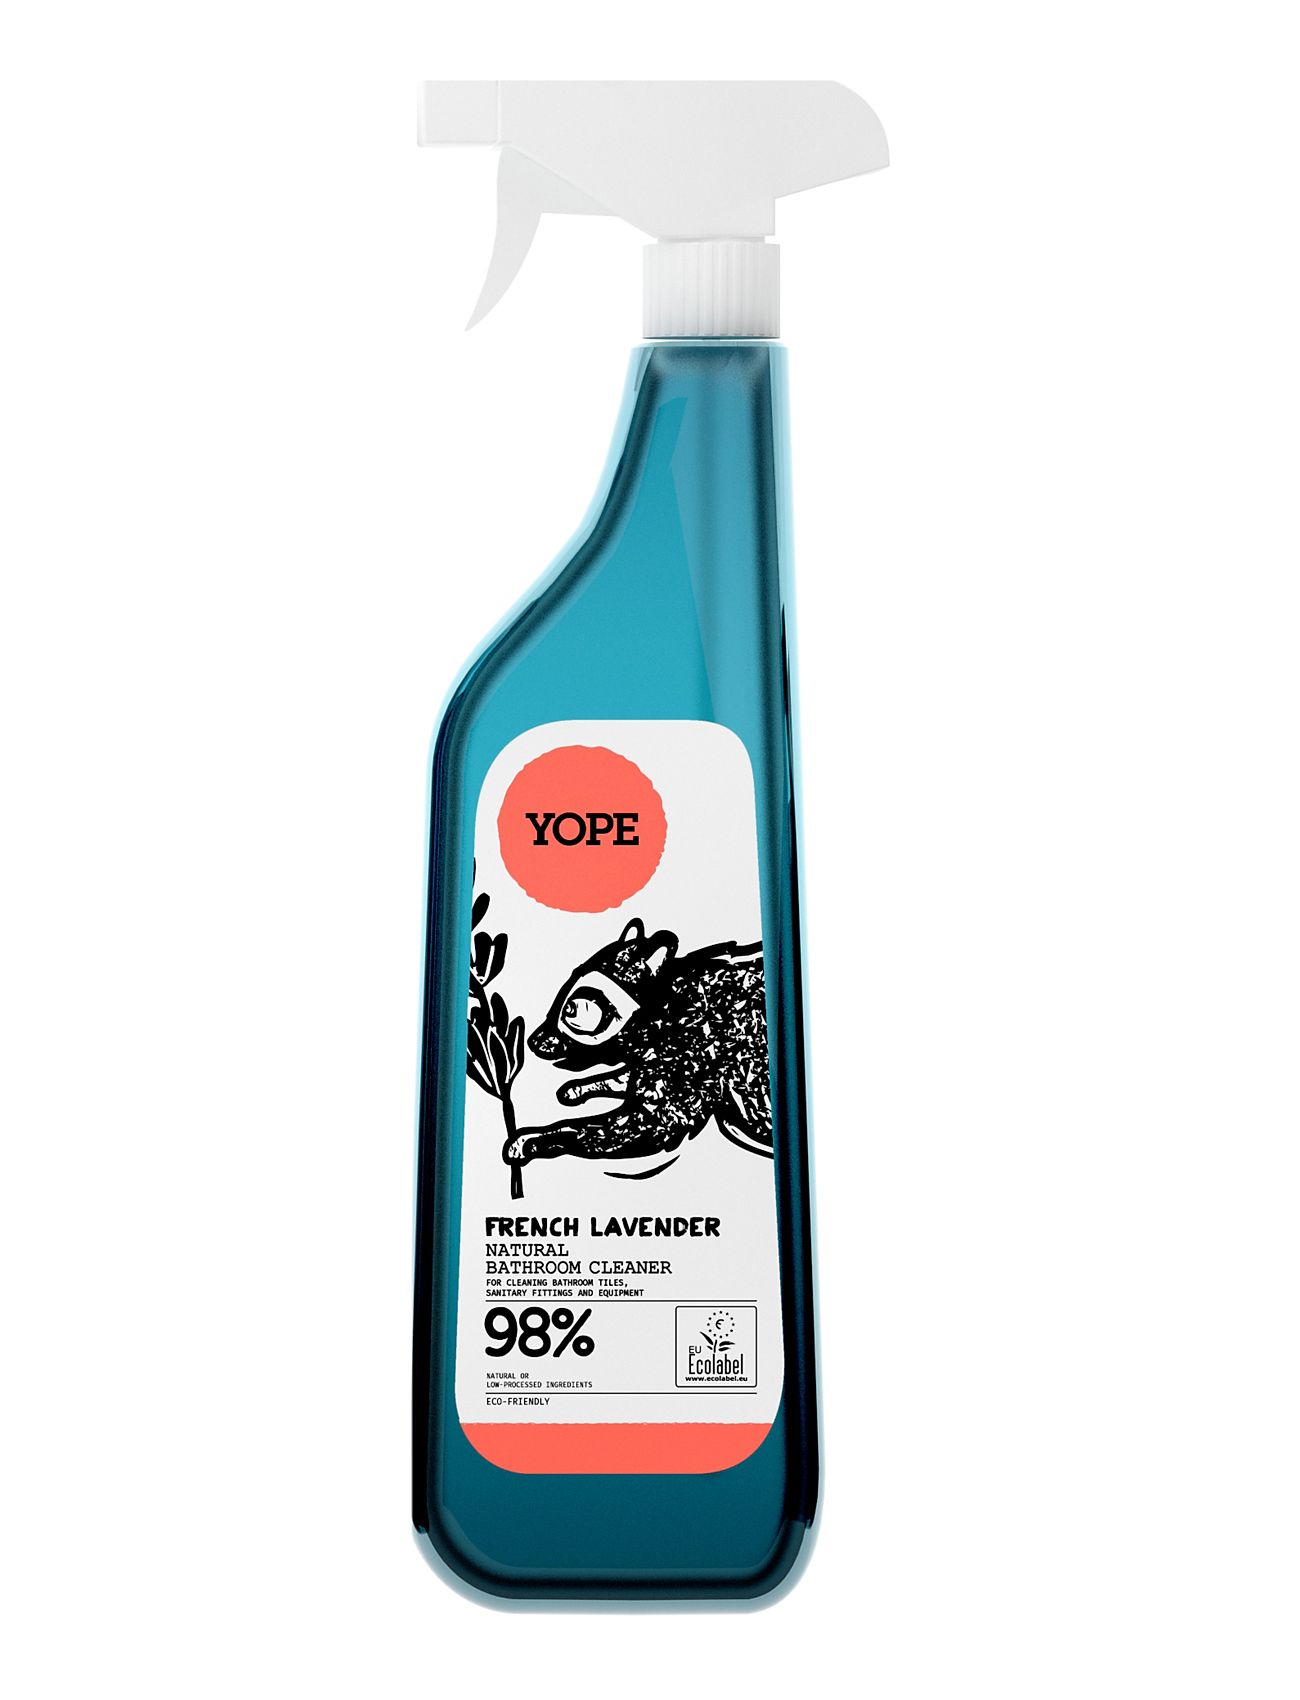 Yope Bathroom Cleaner French Lavender Beauty Women Home Cleaning Products Nude YOPE